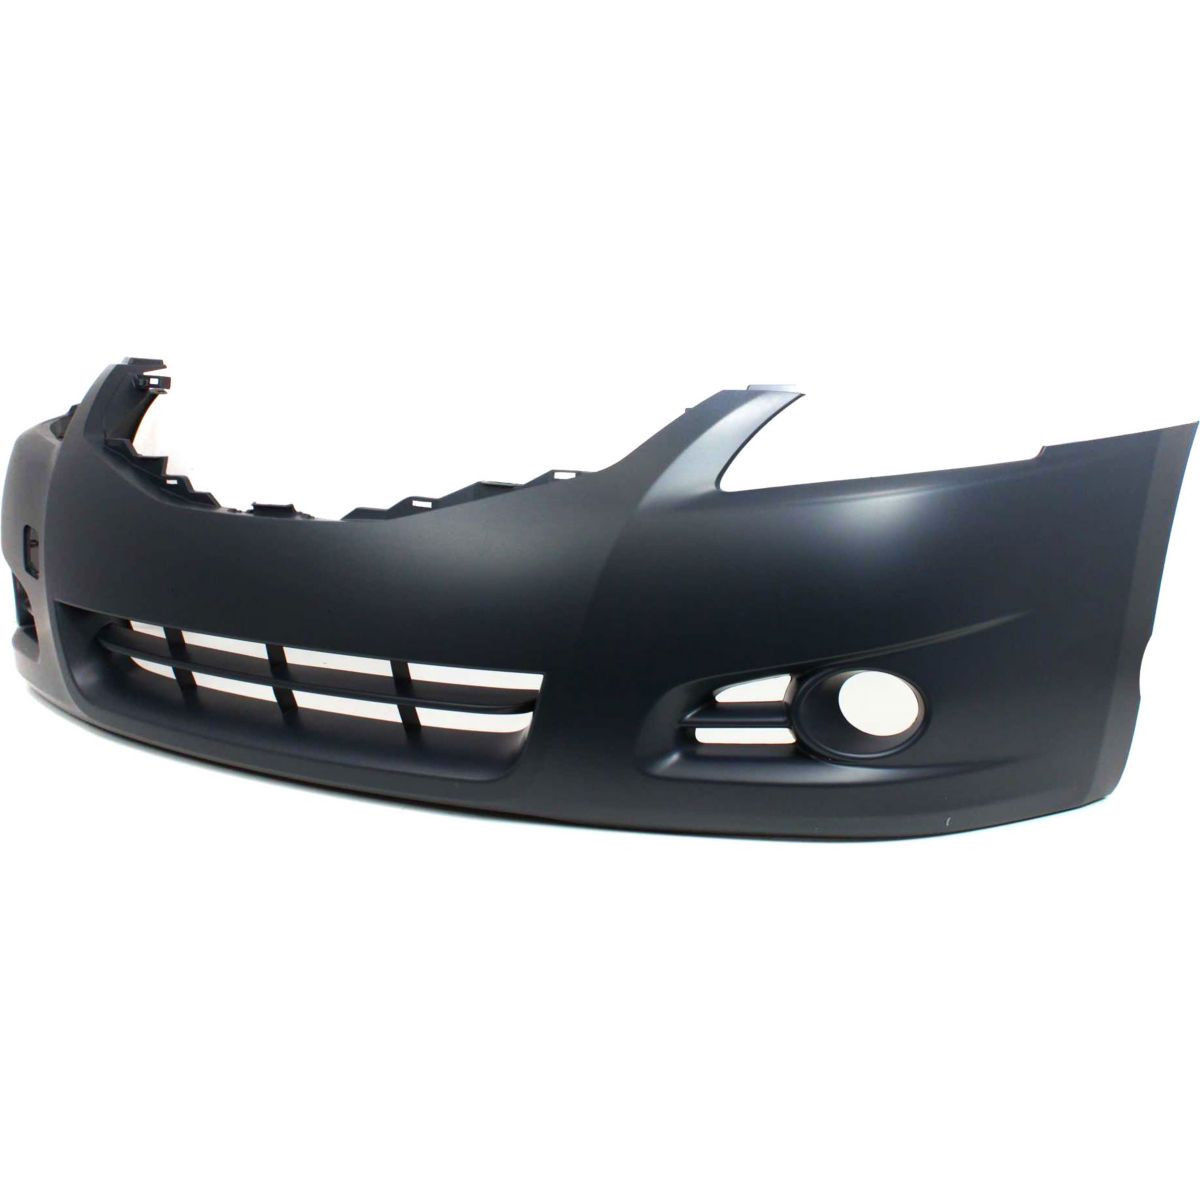 2010-2012 NISSAN ALTIMA Sedan Front Bumper Cover Painted to Match